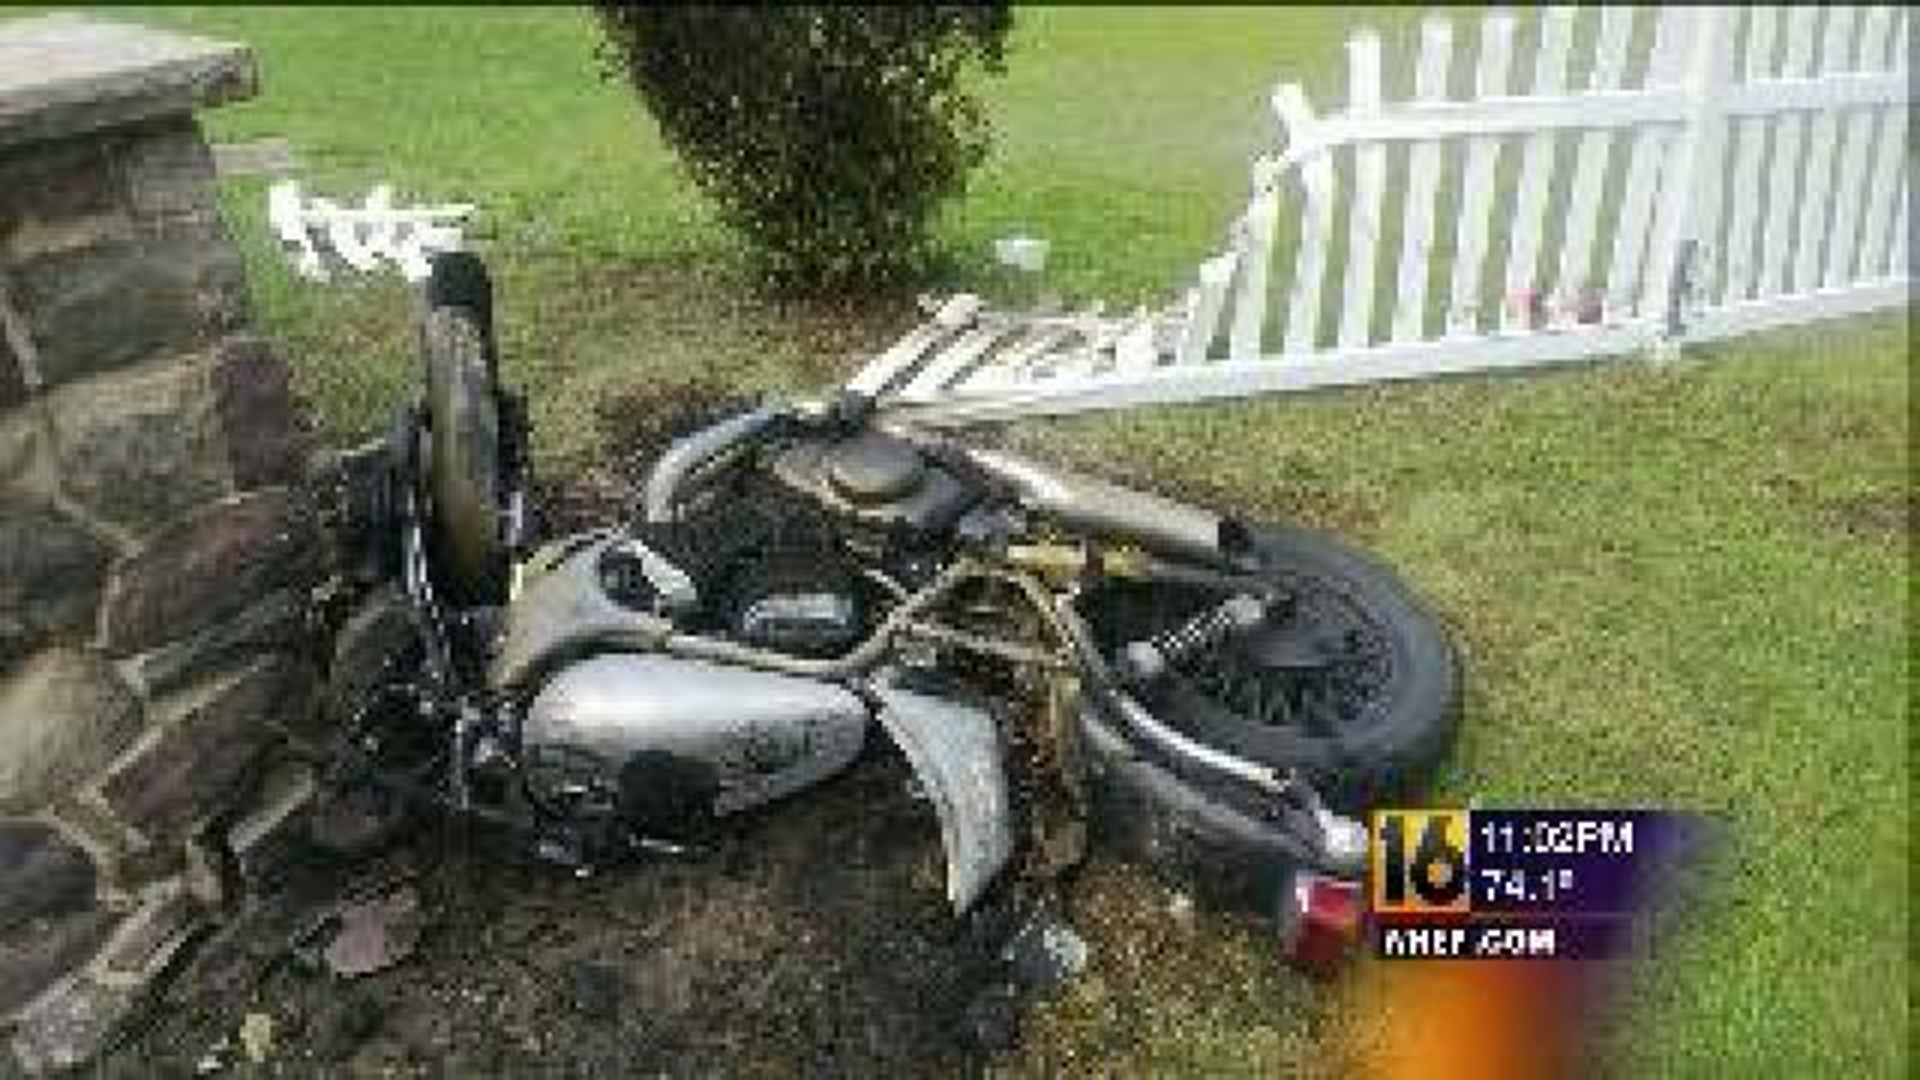 Police: Man Found with Drugs After Motorcycle Crash